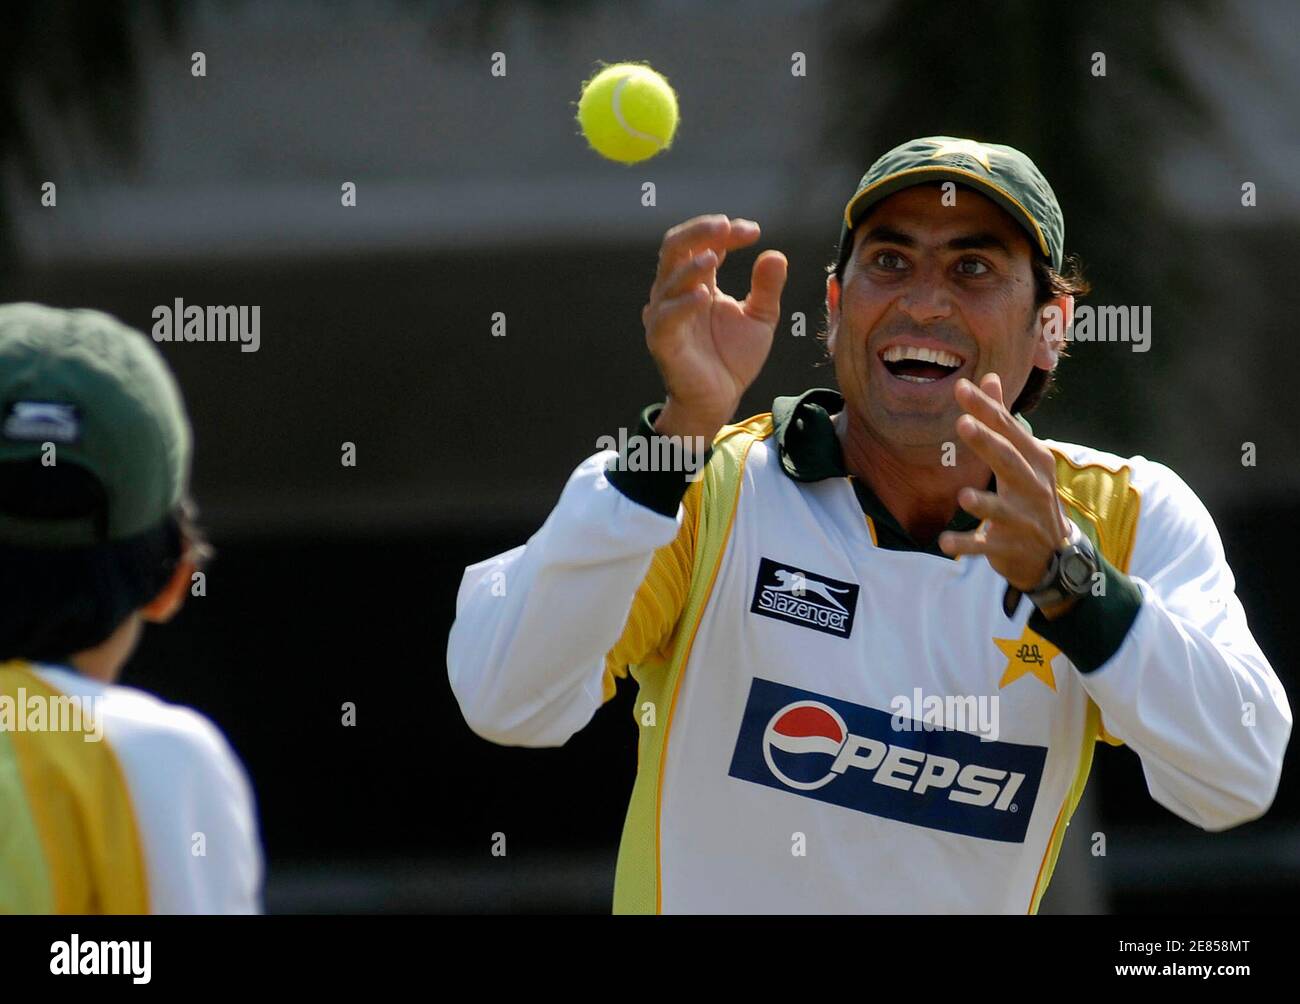 Pakistan's Younis Khan catches a tennis ball during a training session for  the T20 Cricket World Cup in Durban, September 11, 2007. REUTERS/Rogan Ward  (SOUTH AFRICA Stock Photo - Alamy